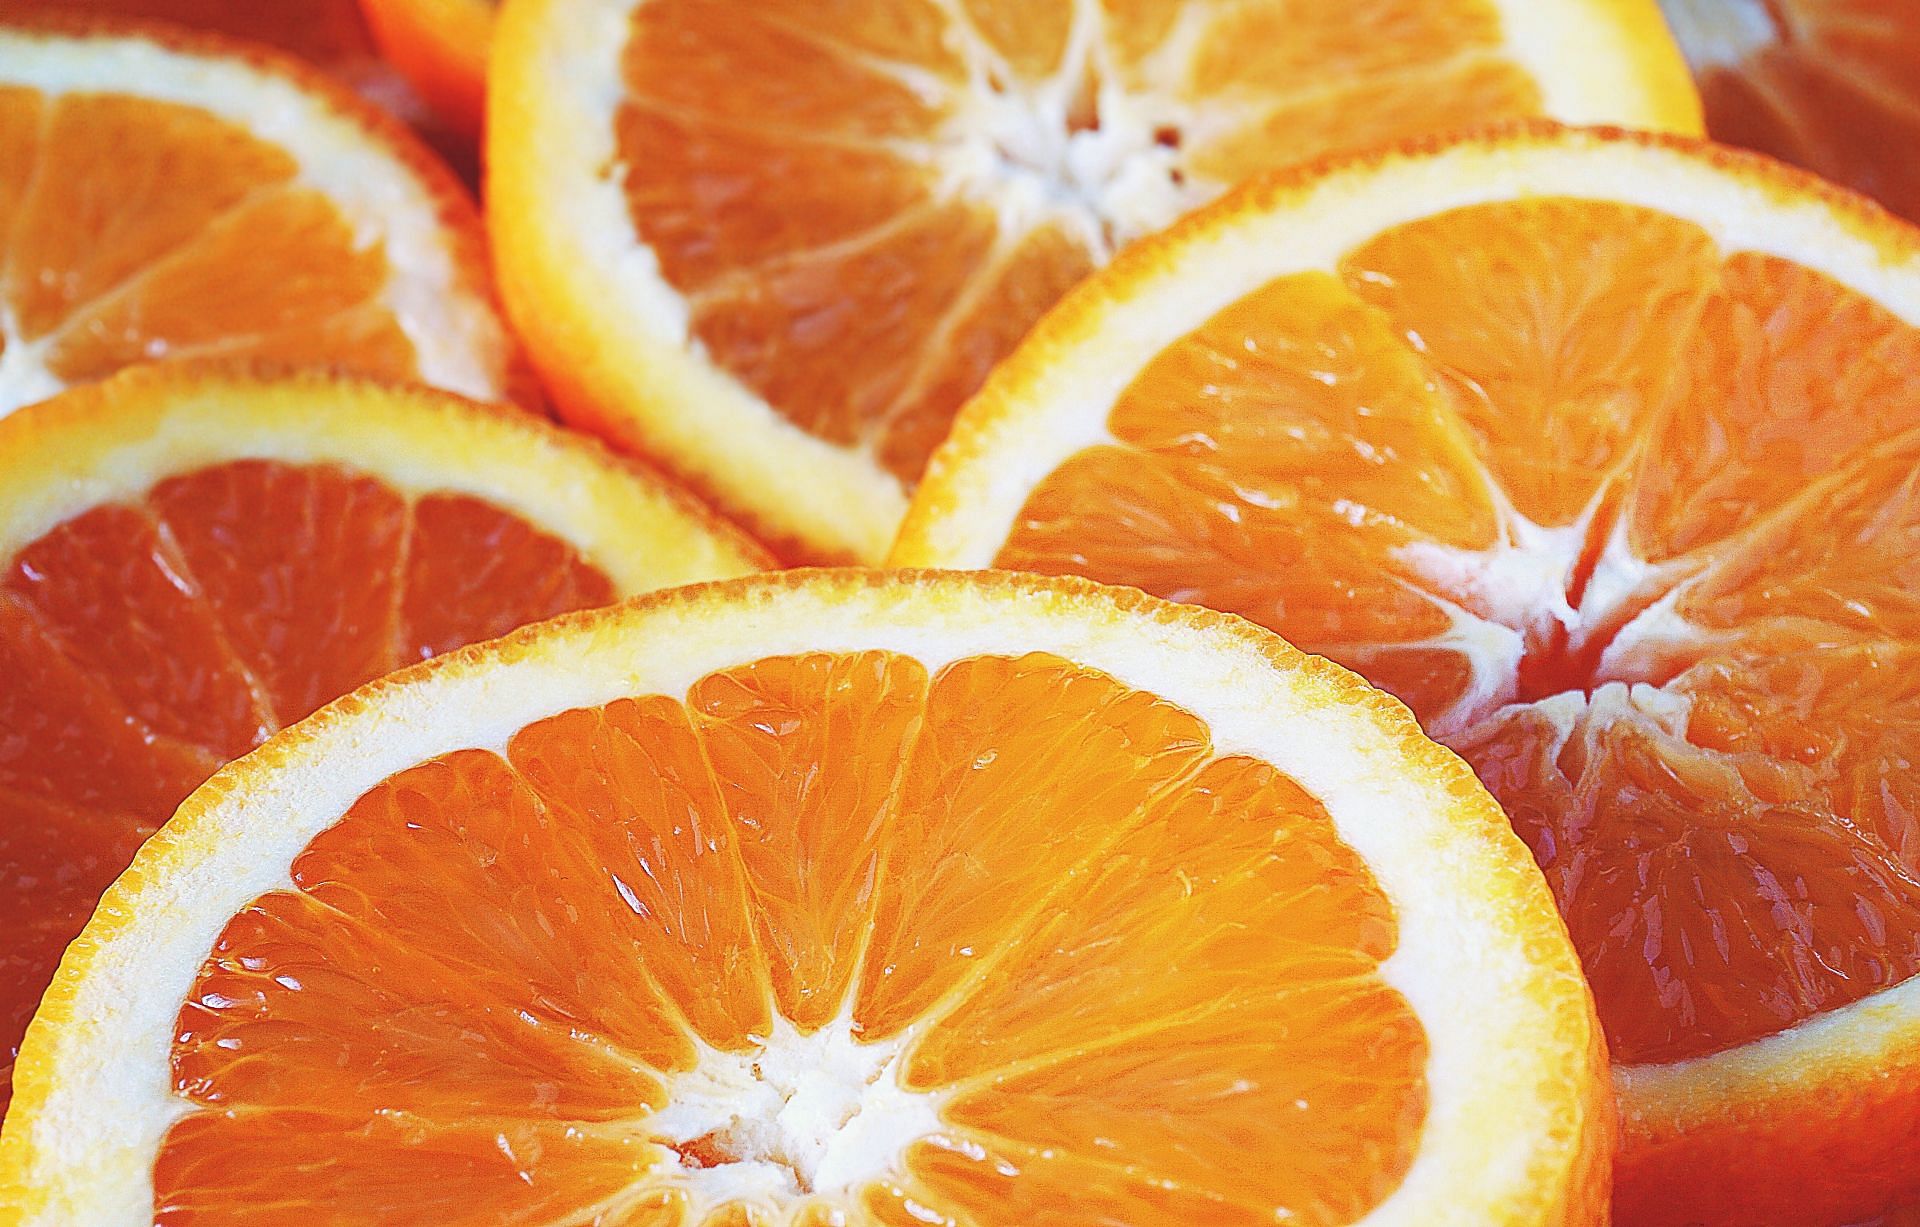 Disadvantages of having orange juice as hangover food (image sourced via Pexels / Photo by Suzy)